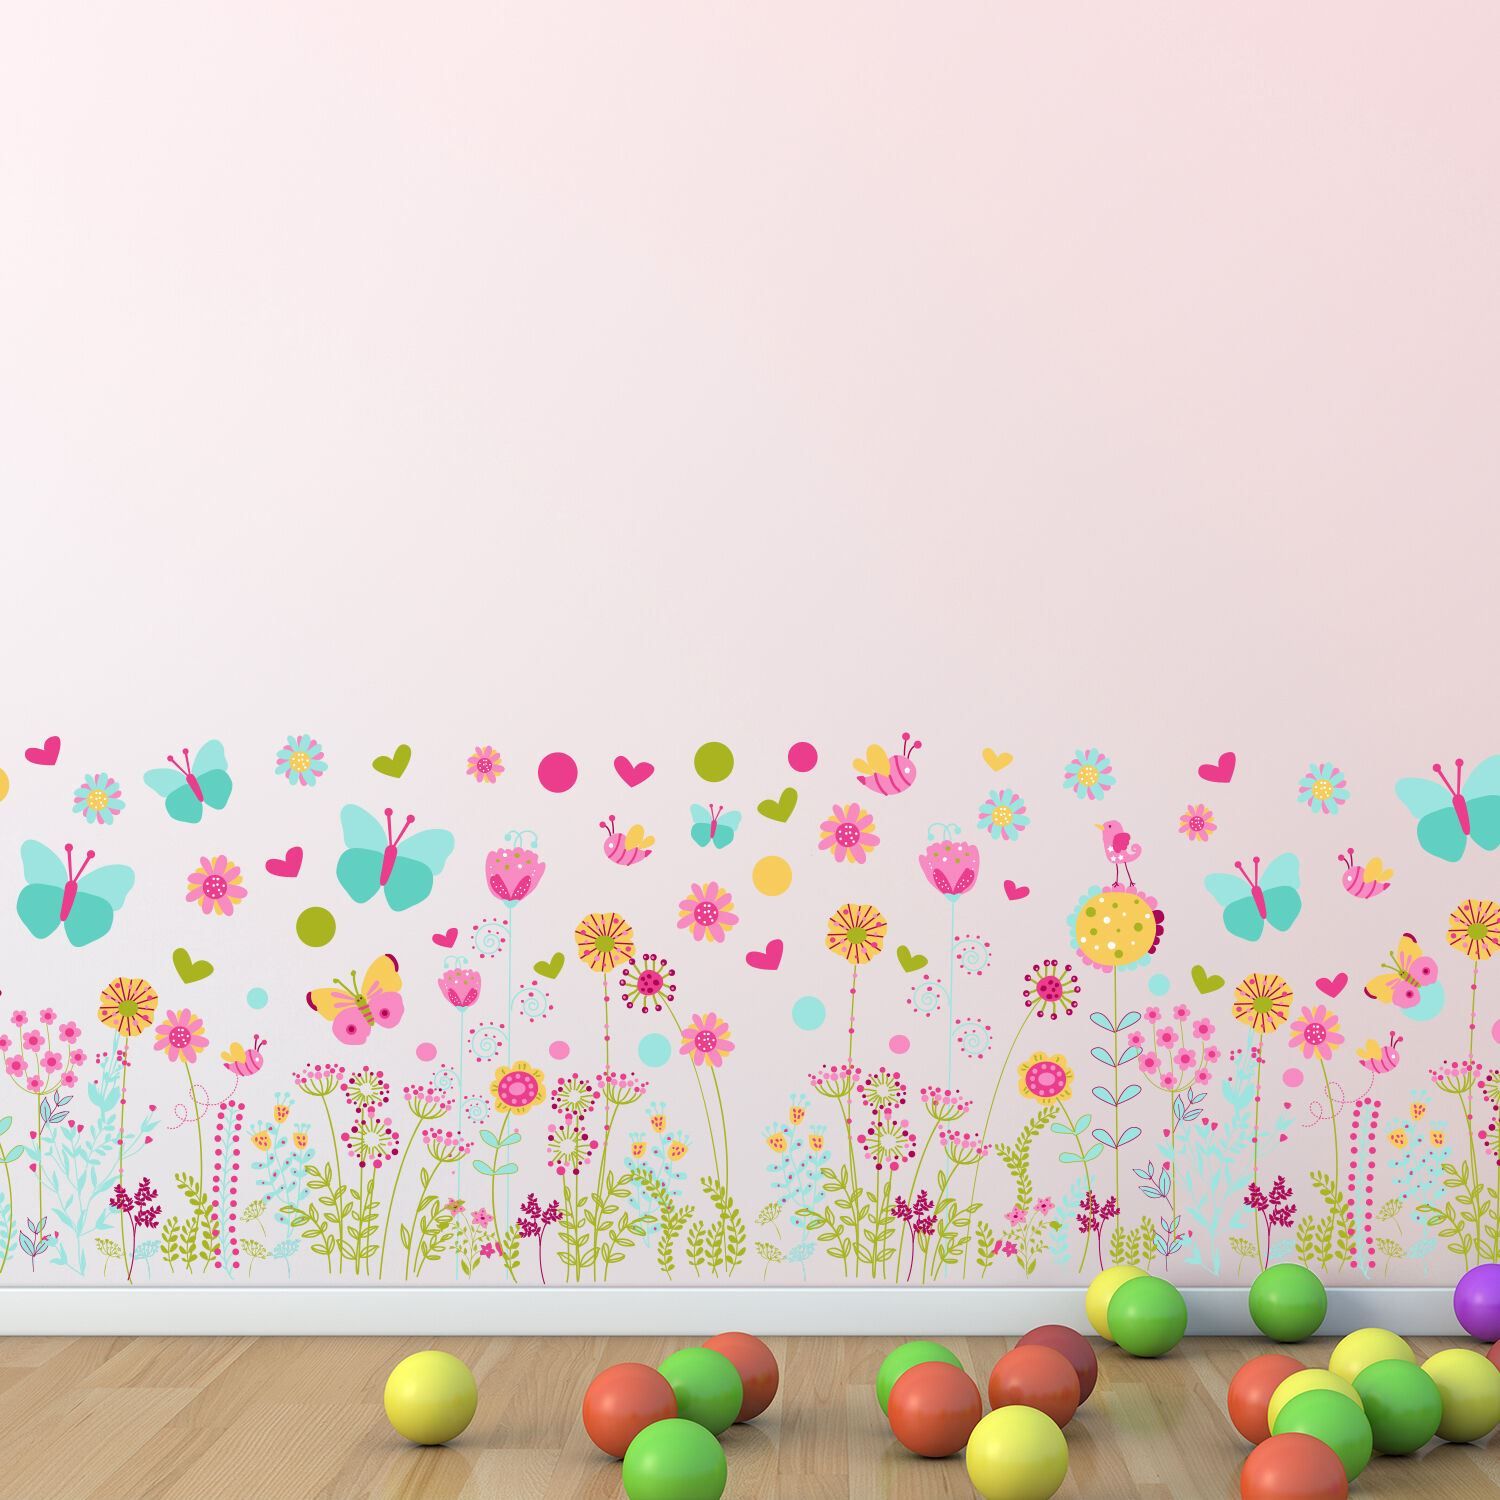 - Every summer has its own story, and ours starts with colourful flowers and beautiful butterflies. 
- This skirting will change your room into a place of joy happiness and summertime.
- Walplus high quality self-adhesive stickers are quick to apply, and can be easily removed and repositioned. 
- It will not damage or leave stains on your wall. Simply peel and stick to any smooth or even surface. 
- Please only attach to the painted surface at least three weeks after painting and clean the surface prior to application. 
- The package includes: 2 sheets of 30cm x 60cm. The finishing size is 28cm x 110cm - less or more, depending on your preferences.